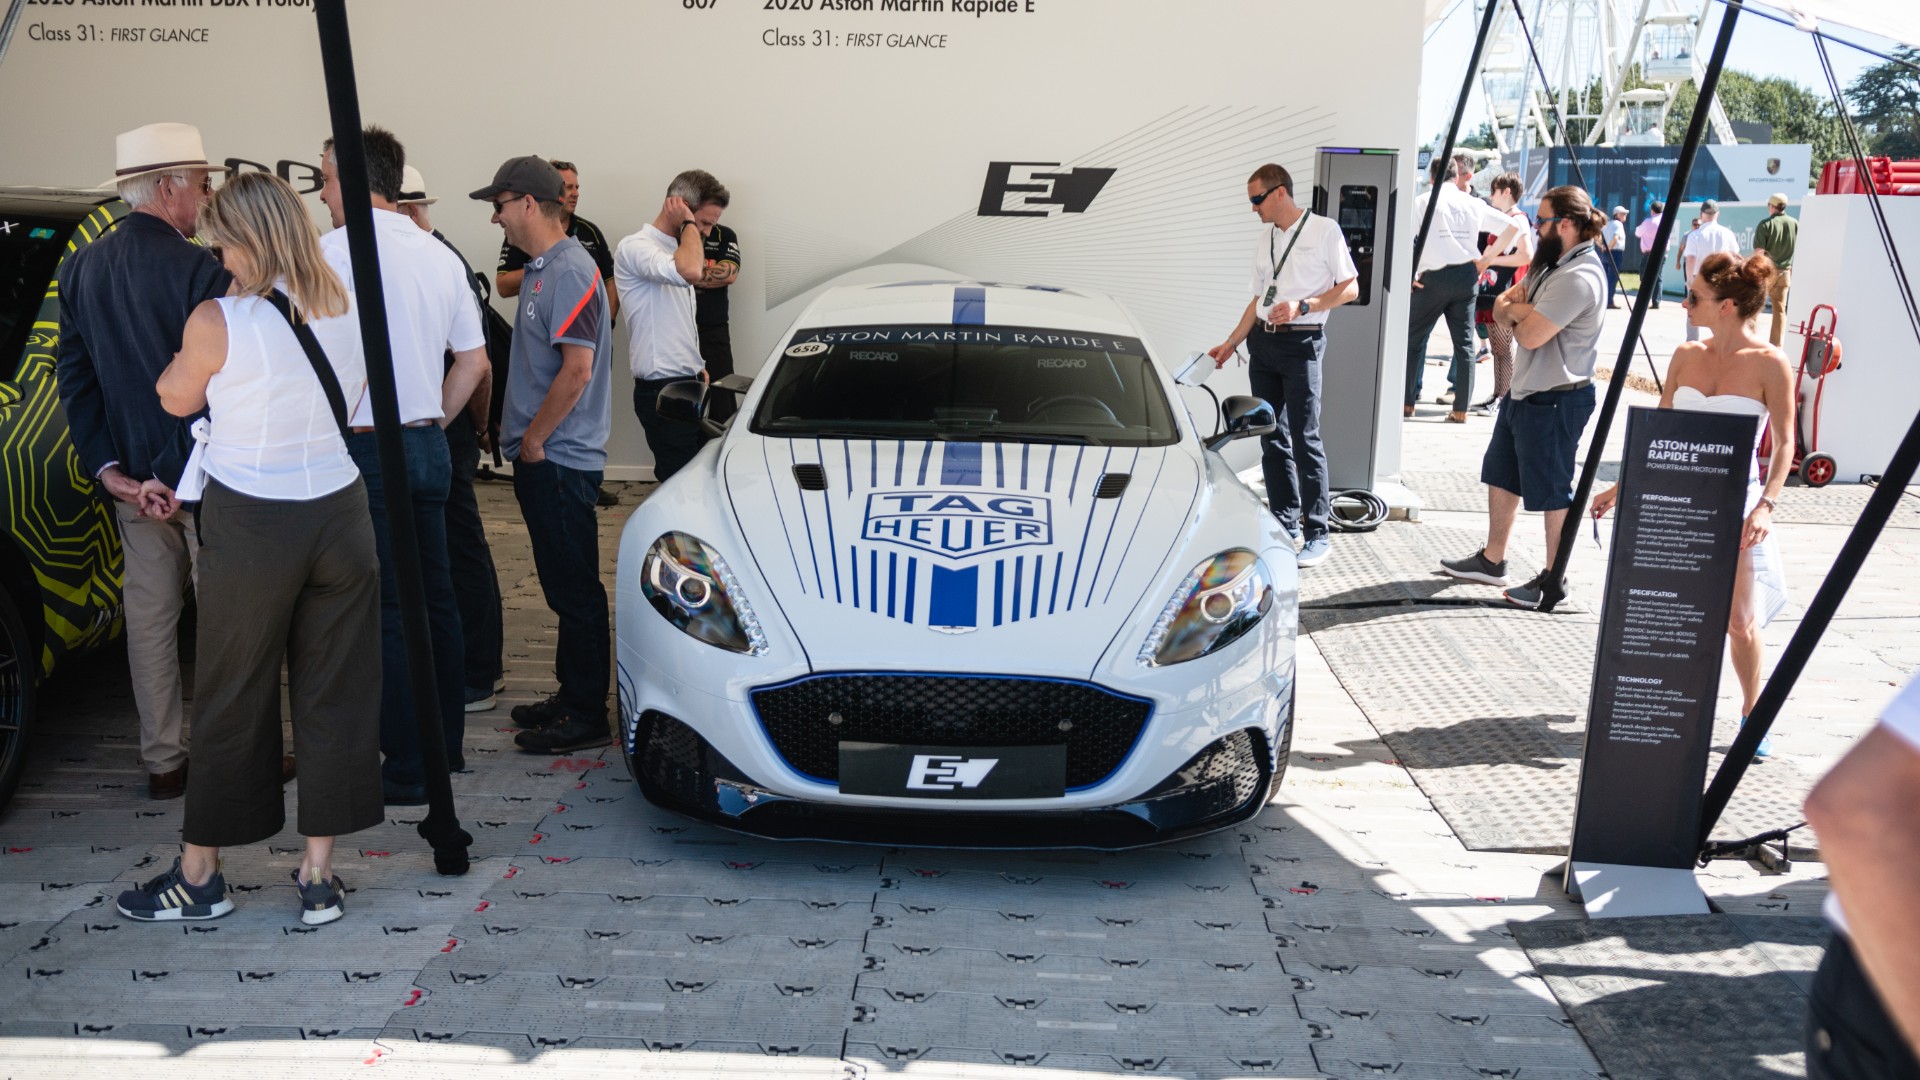 The new cars at Goodwood